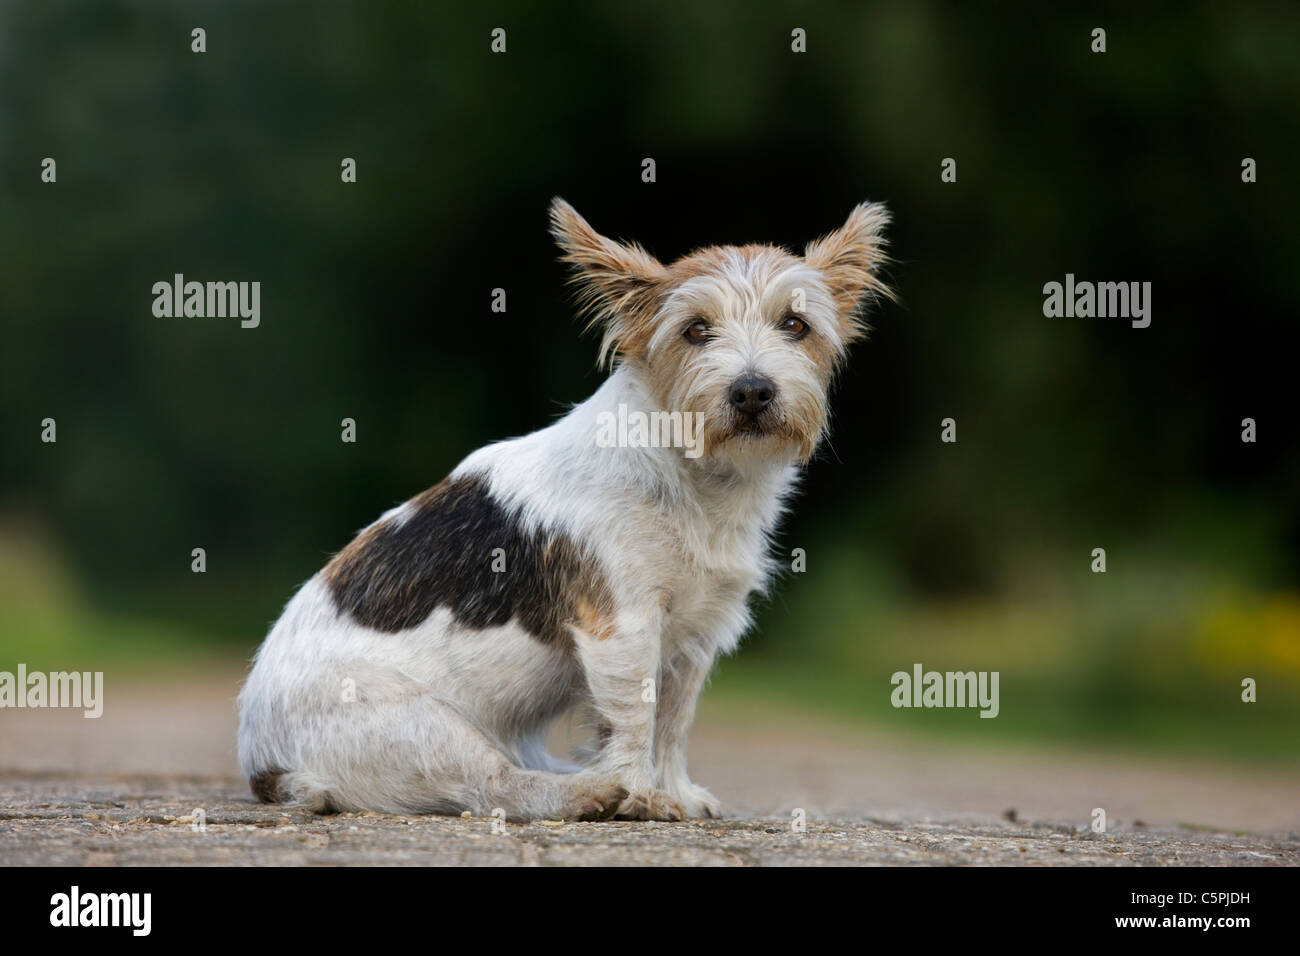 Rough-coated Jack Russell terrier (Canis lupus familiaris) sitting on path Stock Photo